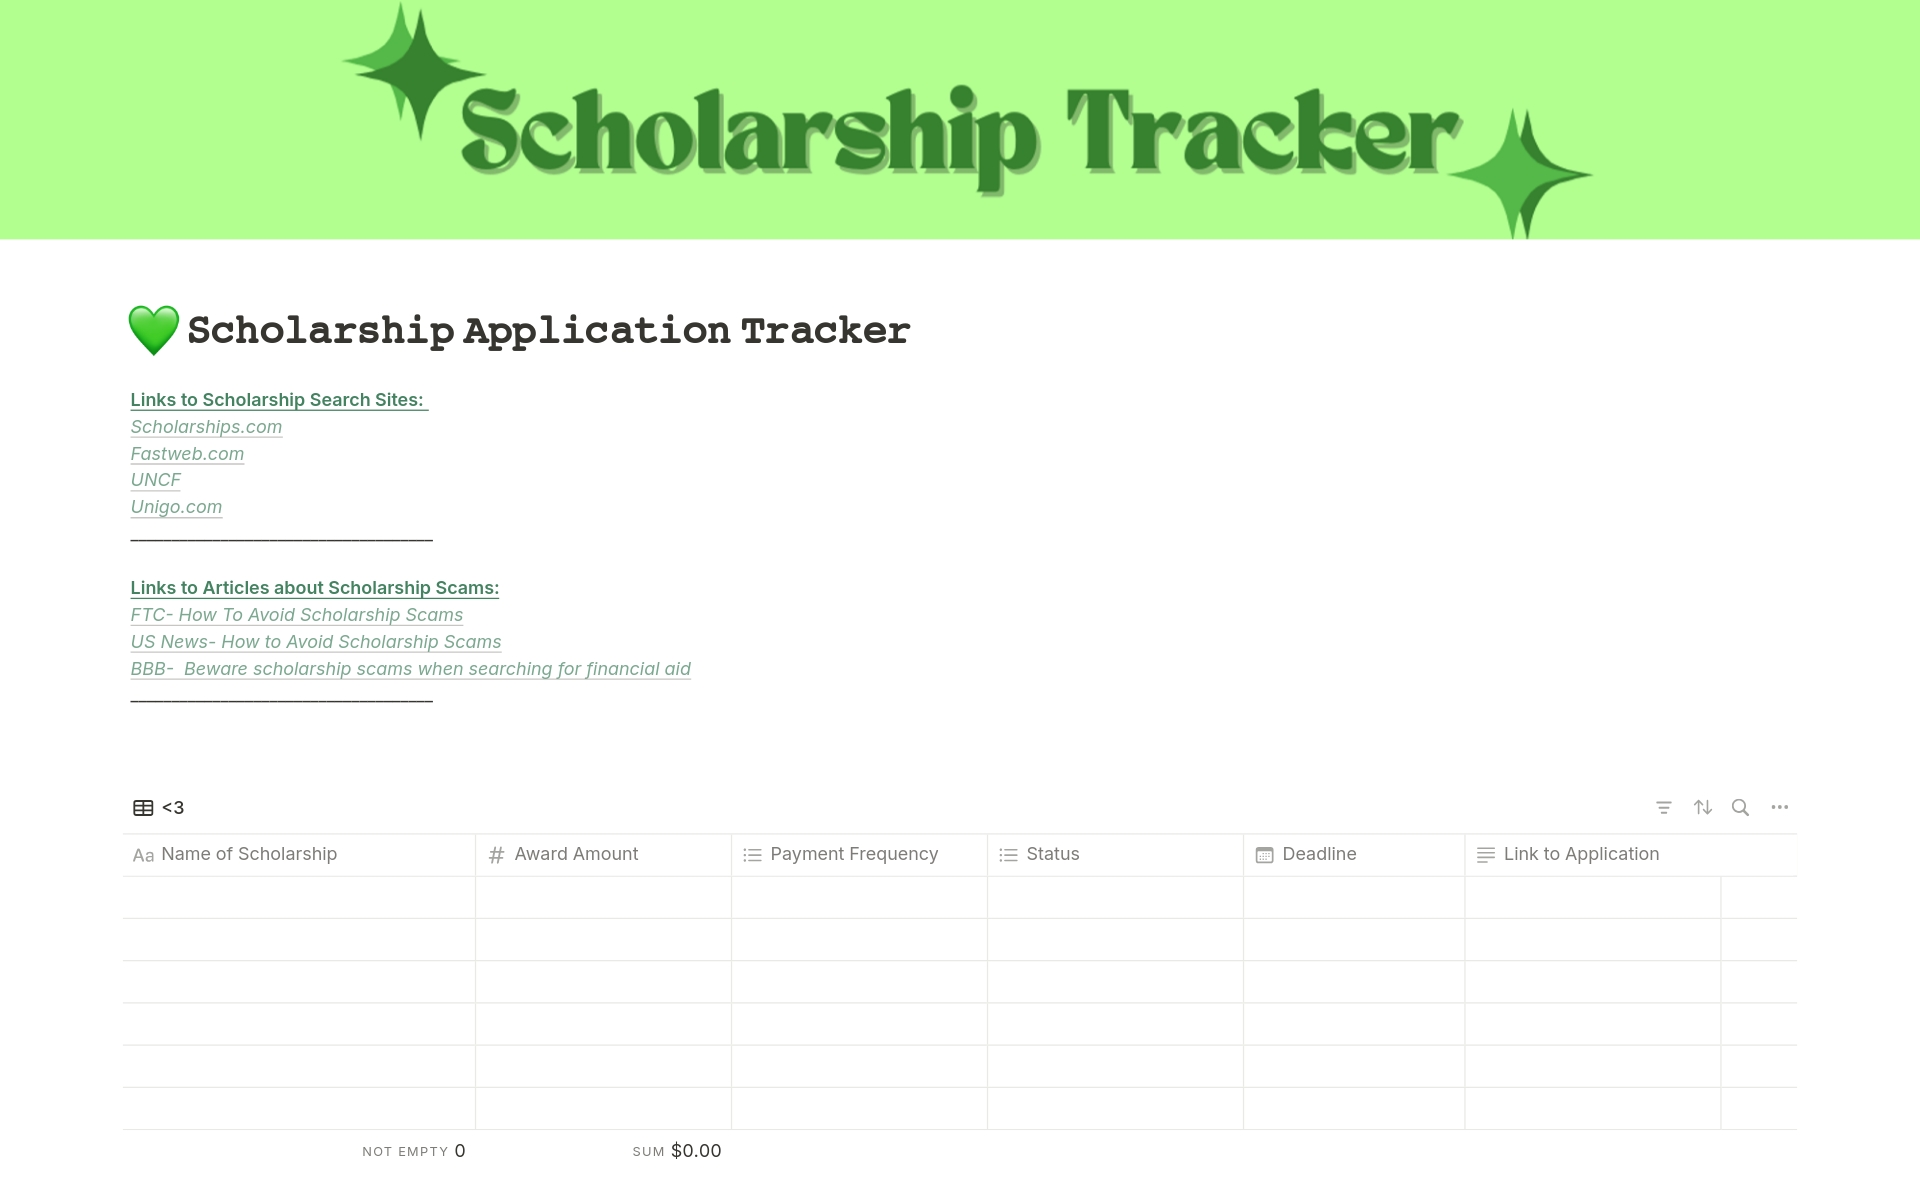 A simple table to keep track of applications for scholarships for the upcoming academic year.